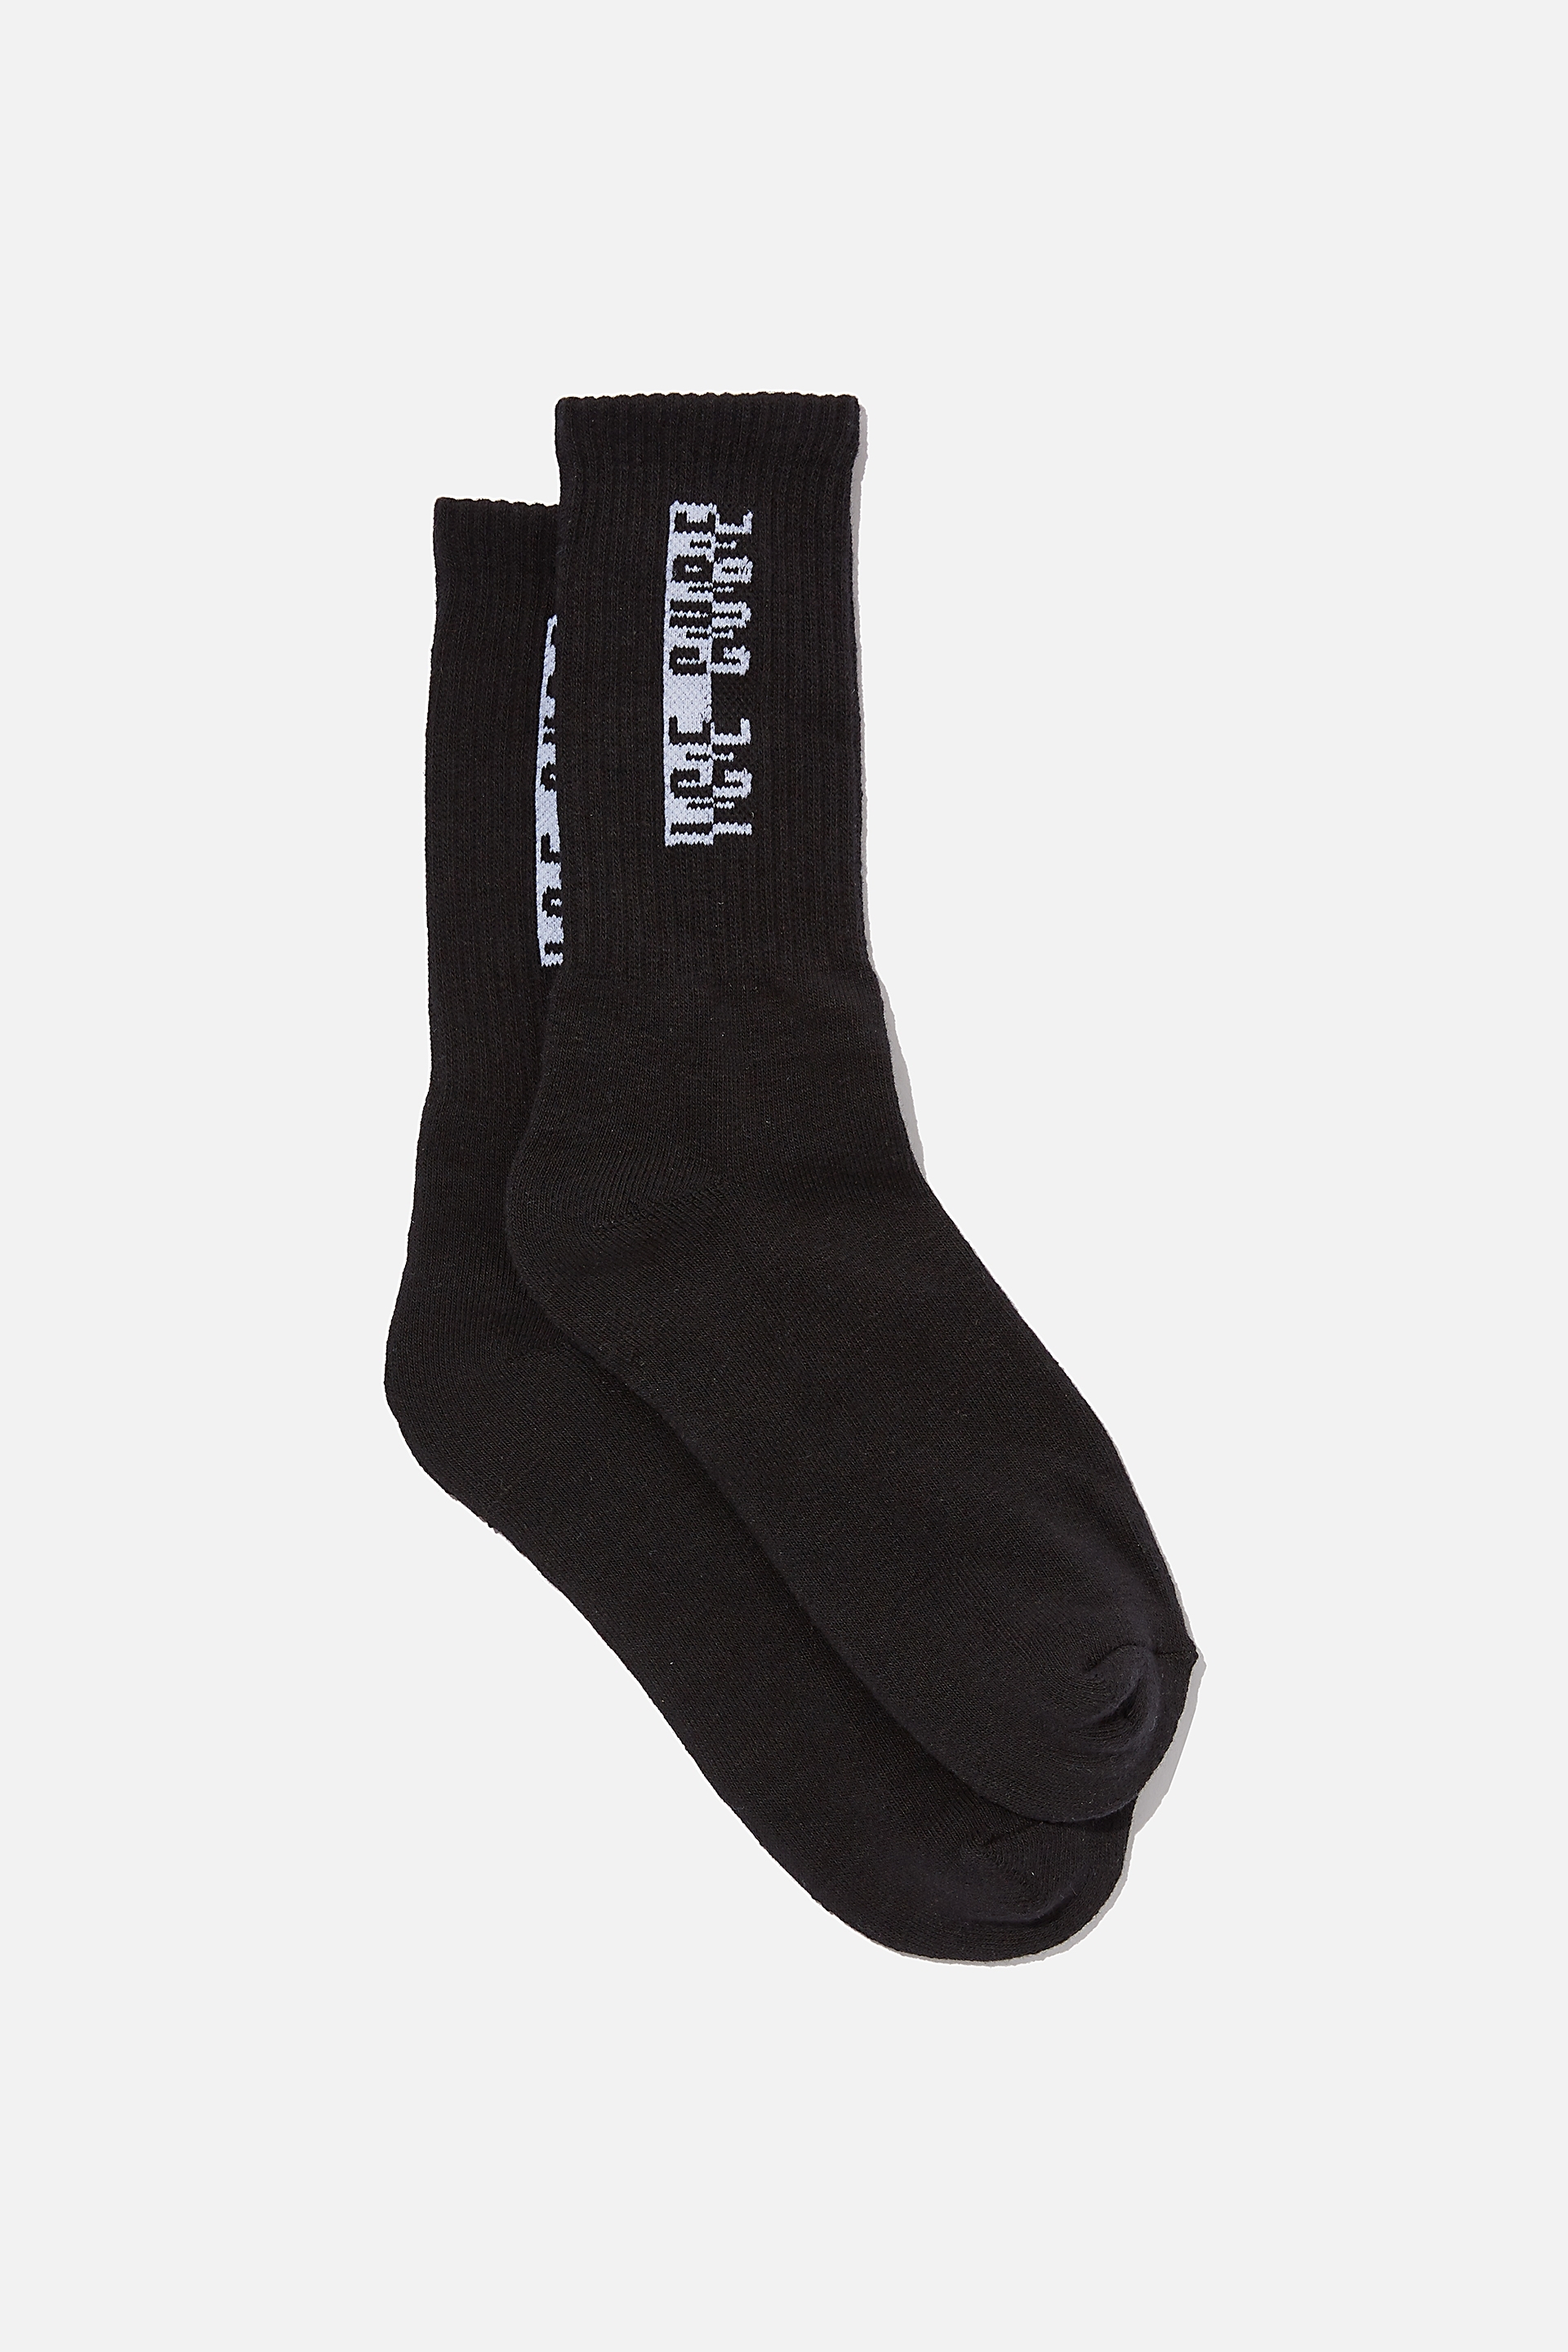 Cotton On Men - Special Edition Active Sock - Lcn mt black / ice cube